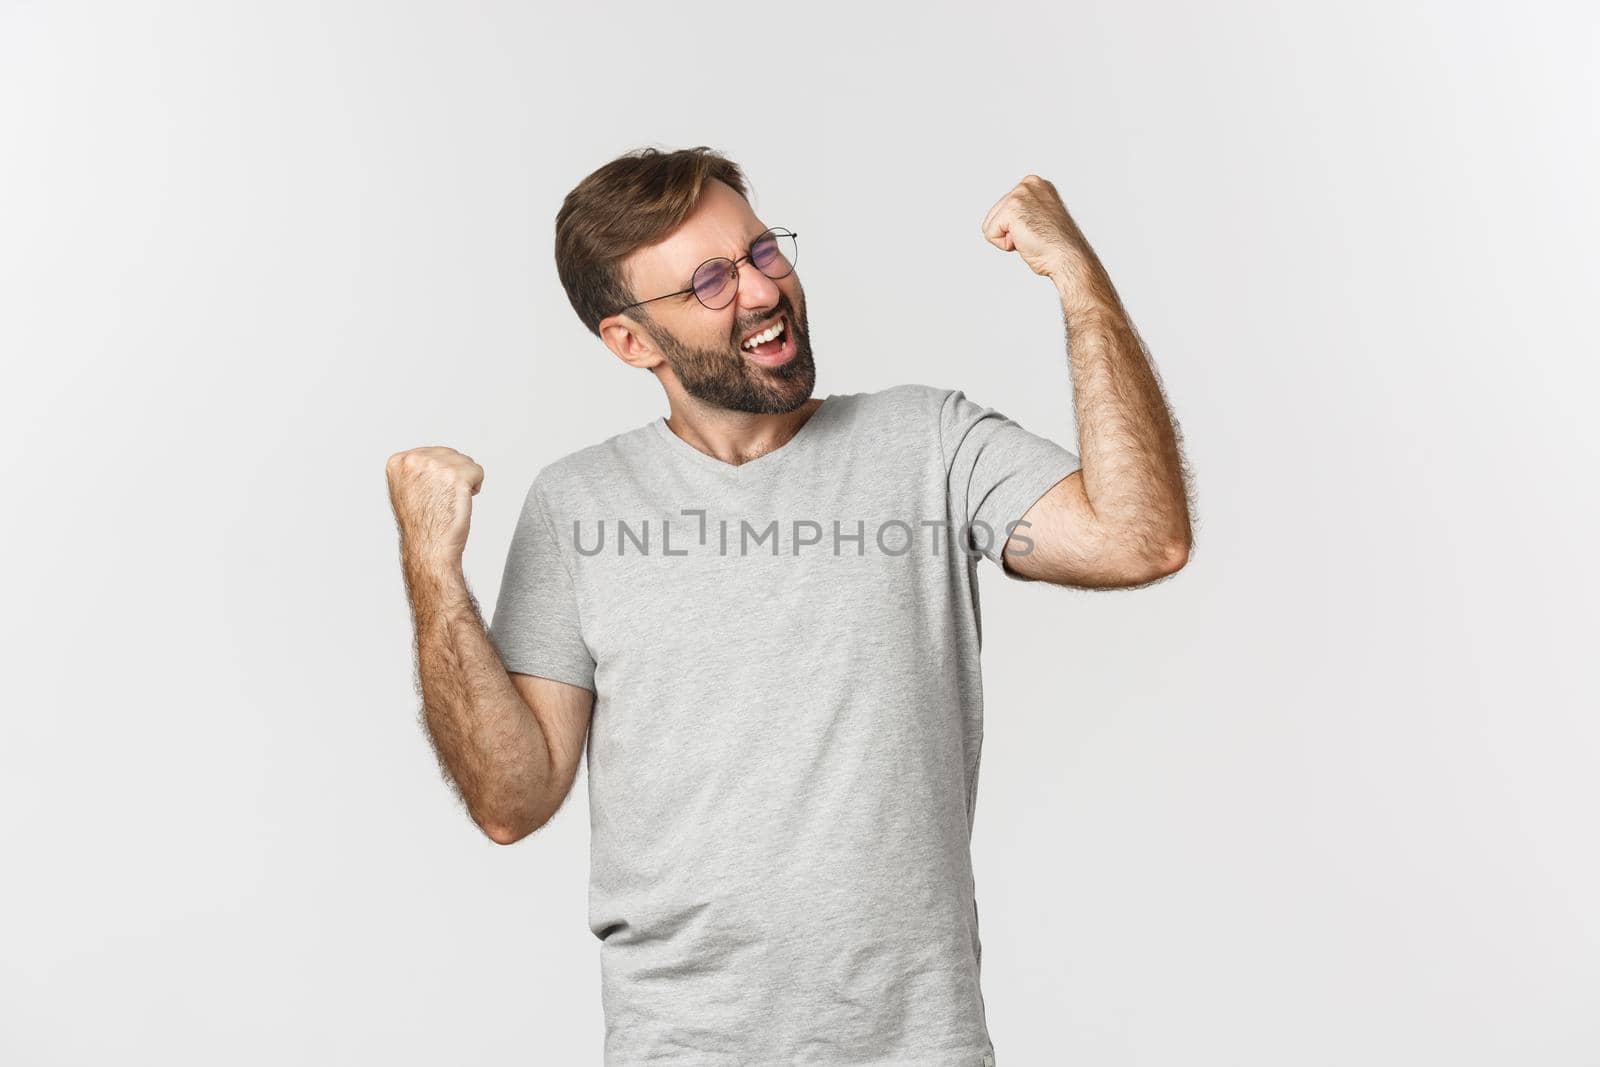 Image of excited man in gray t-shirt and glasses, winning something, rejoicing and feeling like champion, standing over white background.